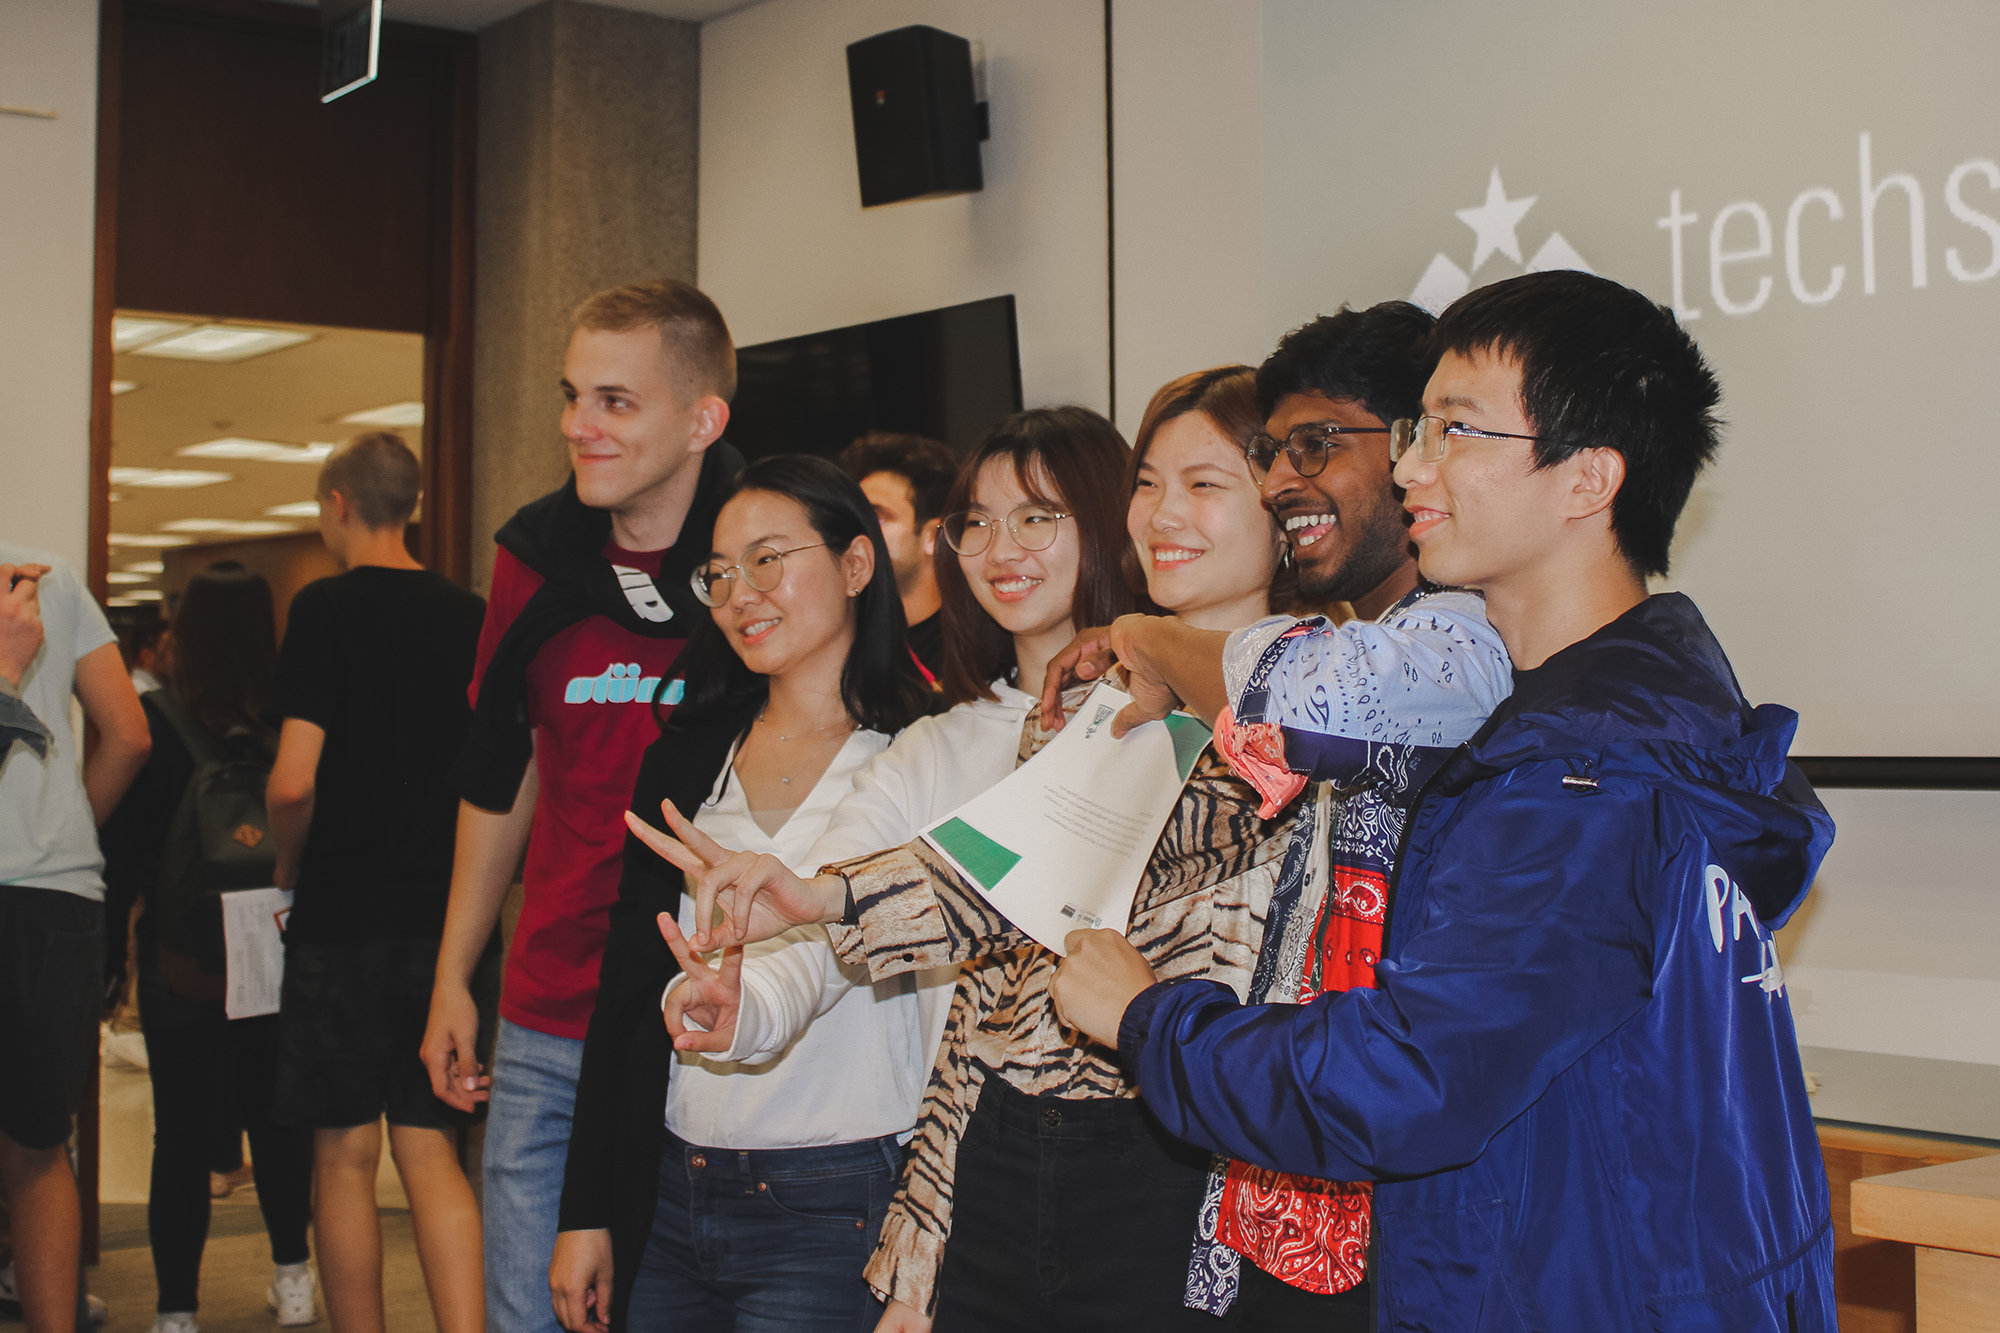 Students receiving prizes at Startup Weekend